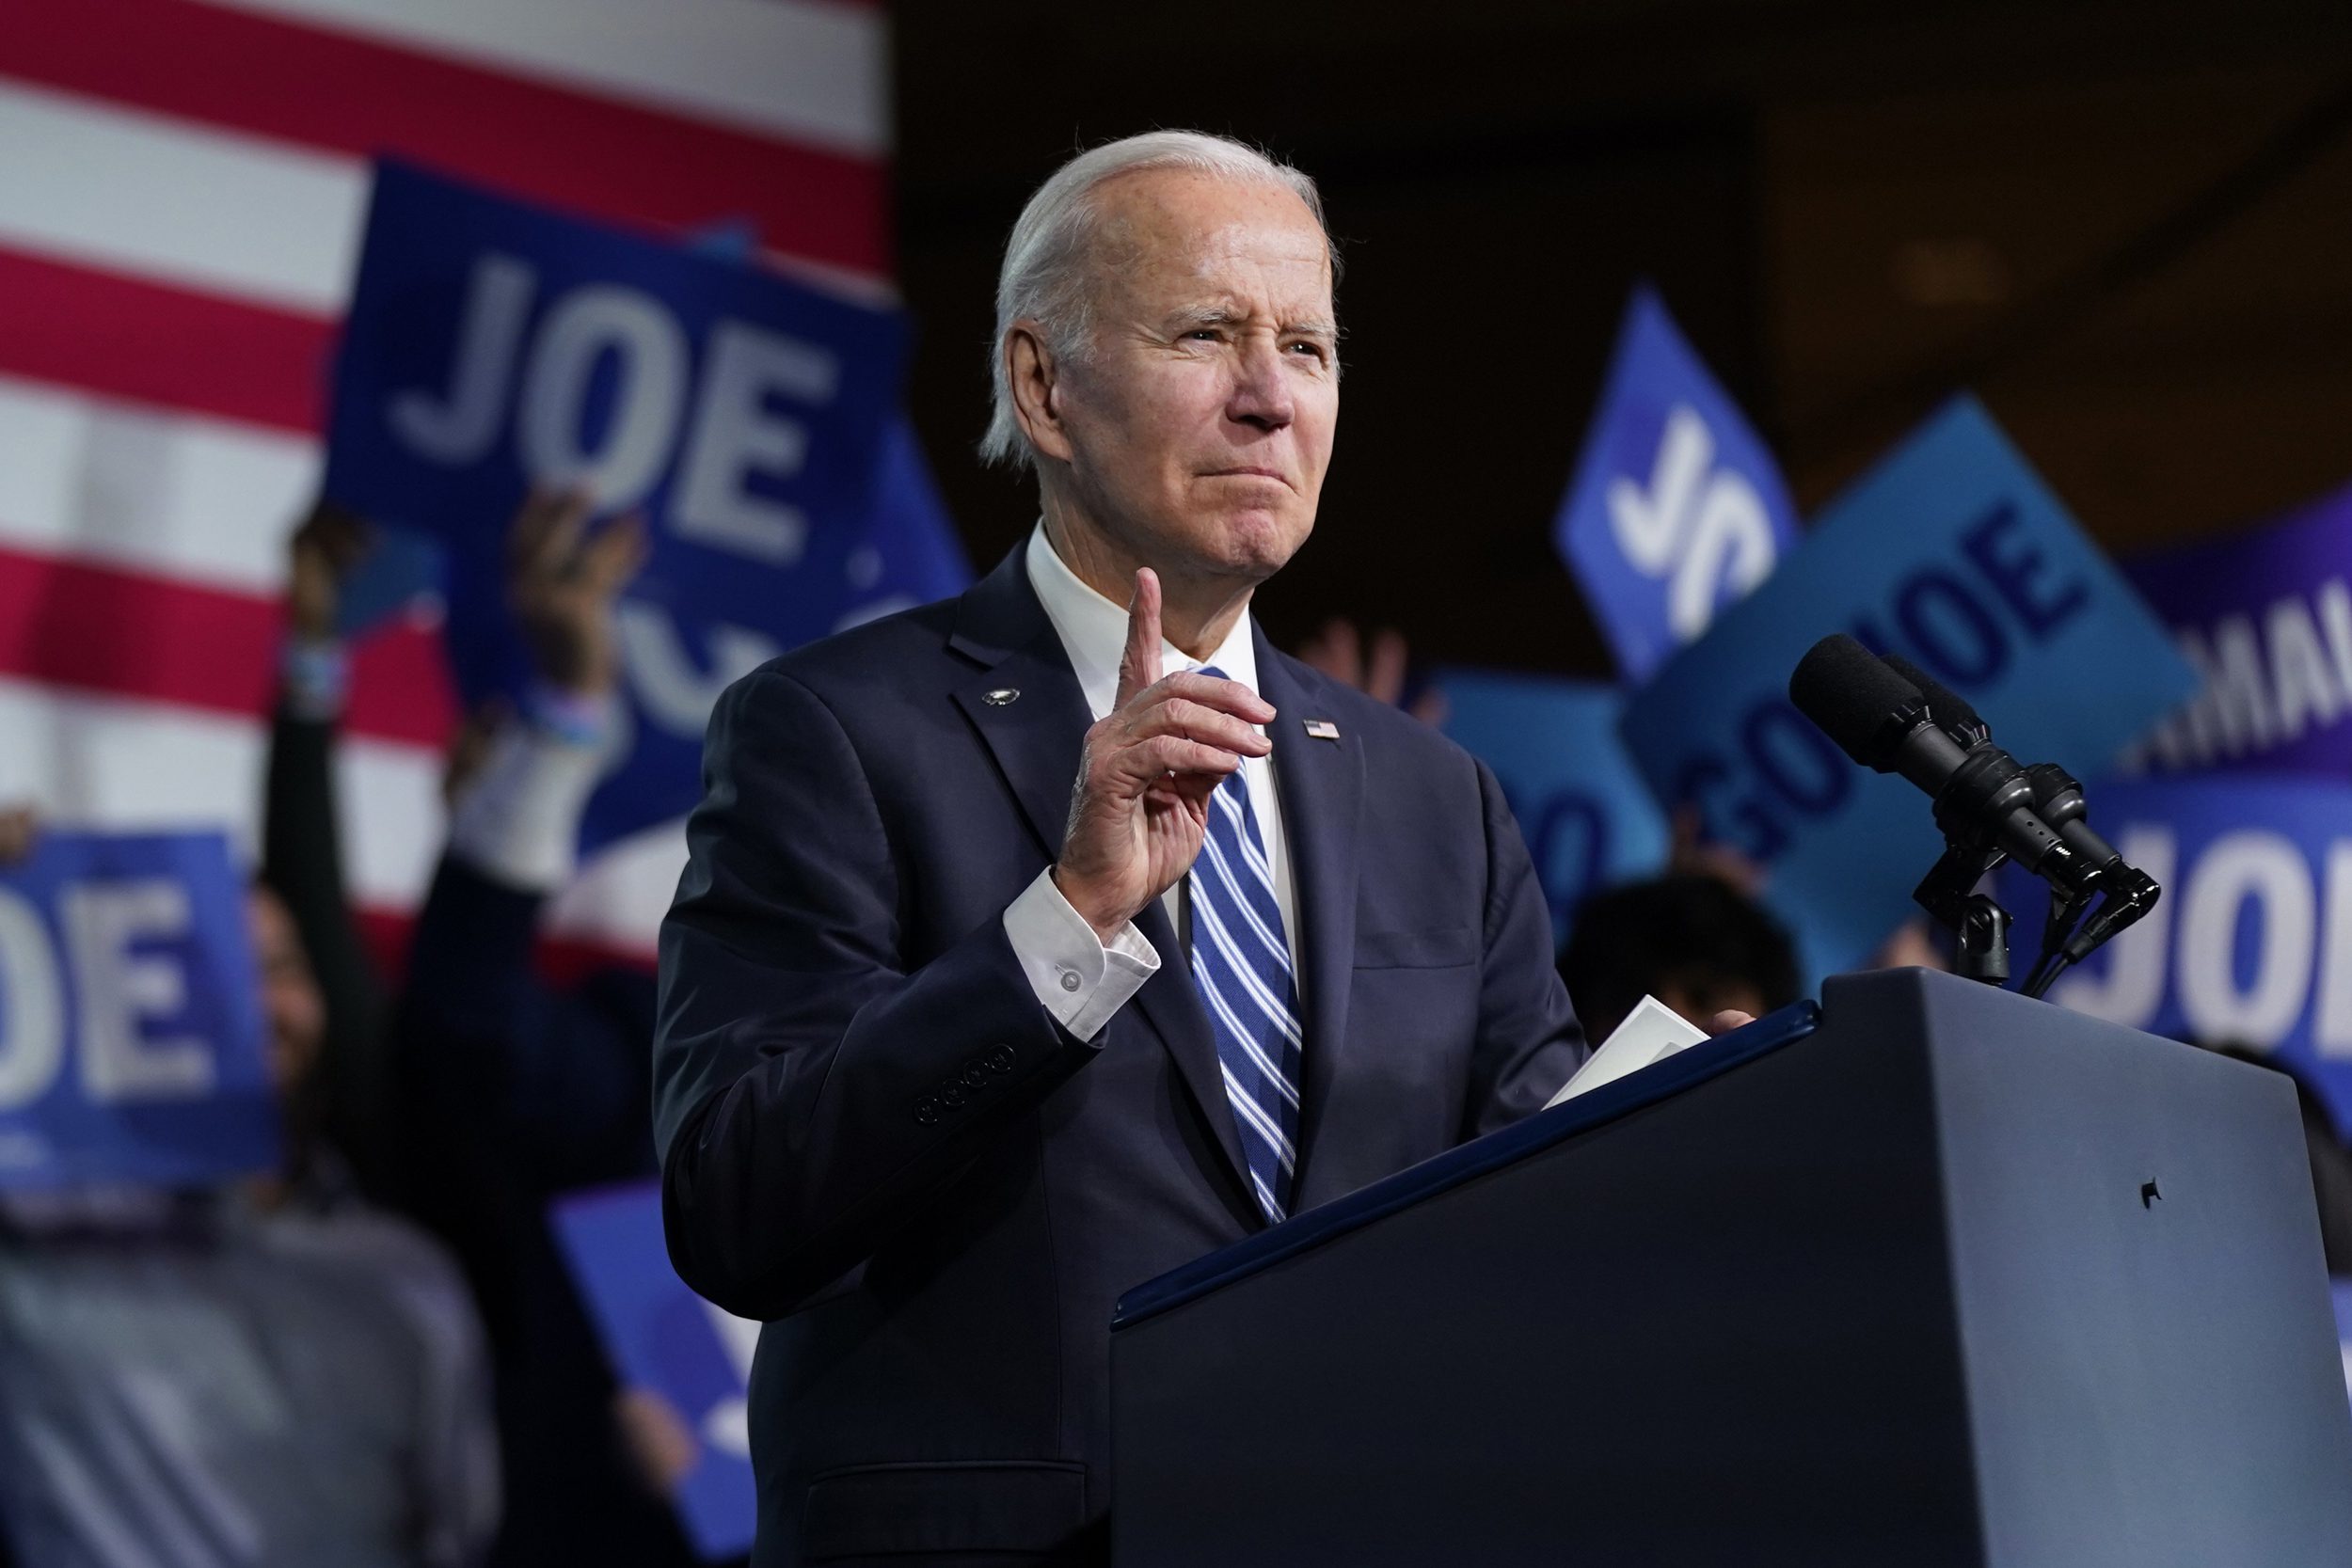 Biden's 2024 Campaign Announcement is Probably Coming Next Week